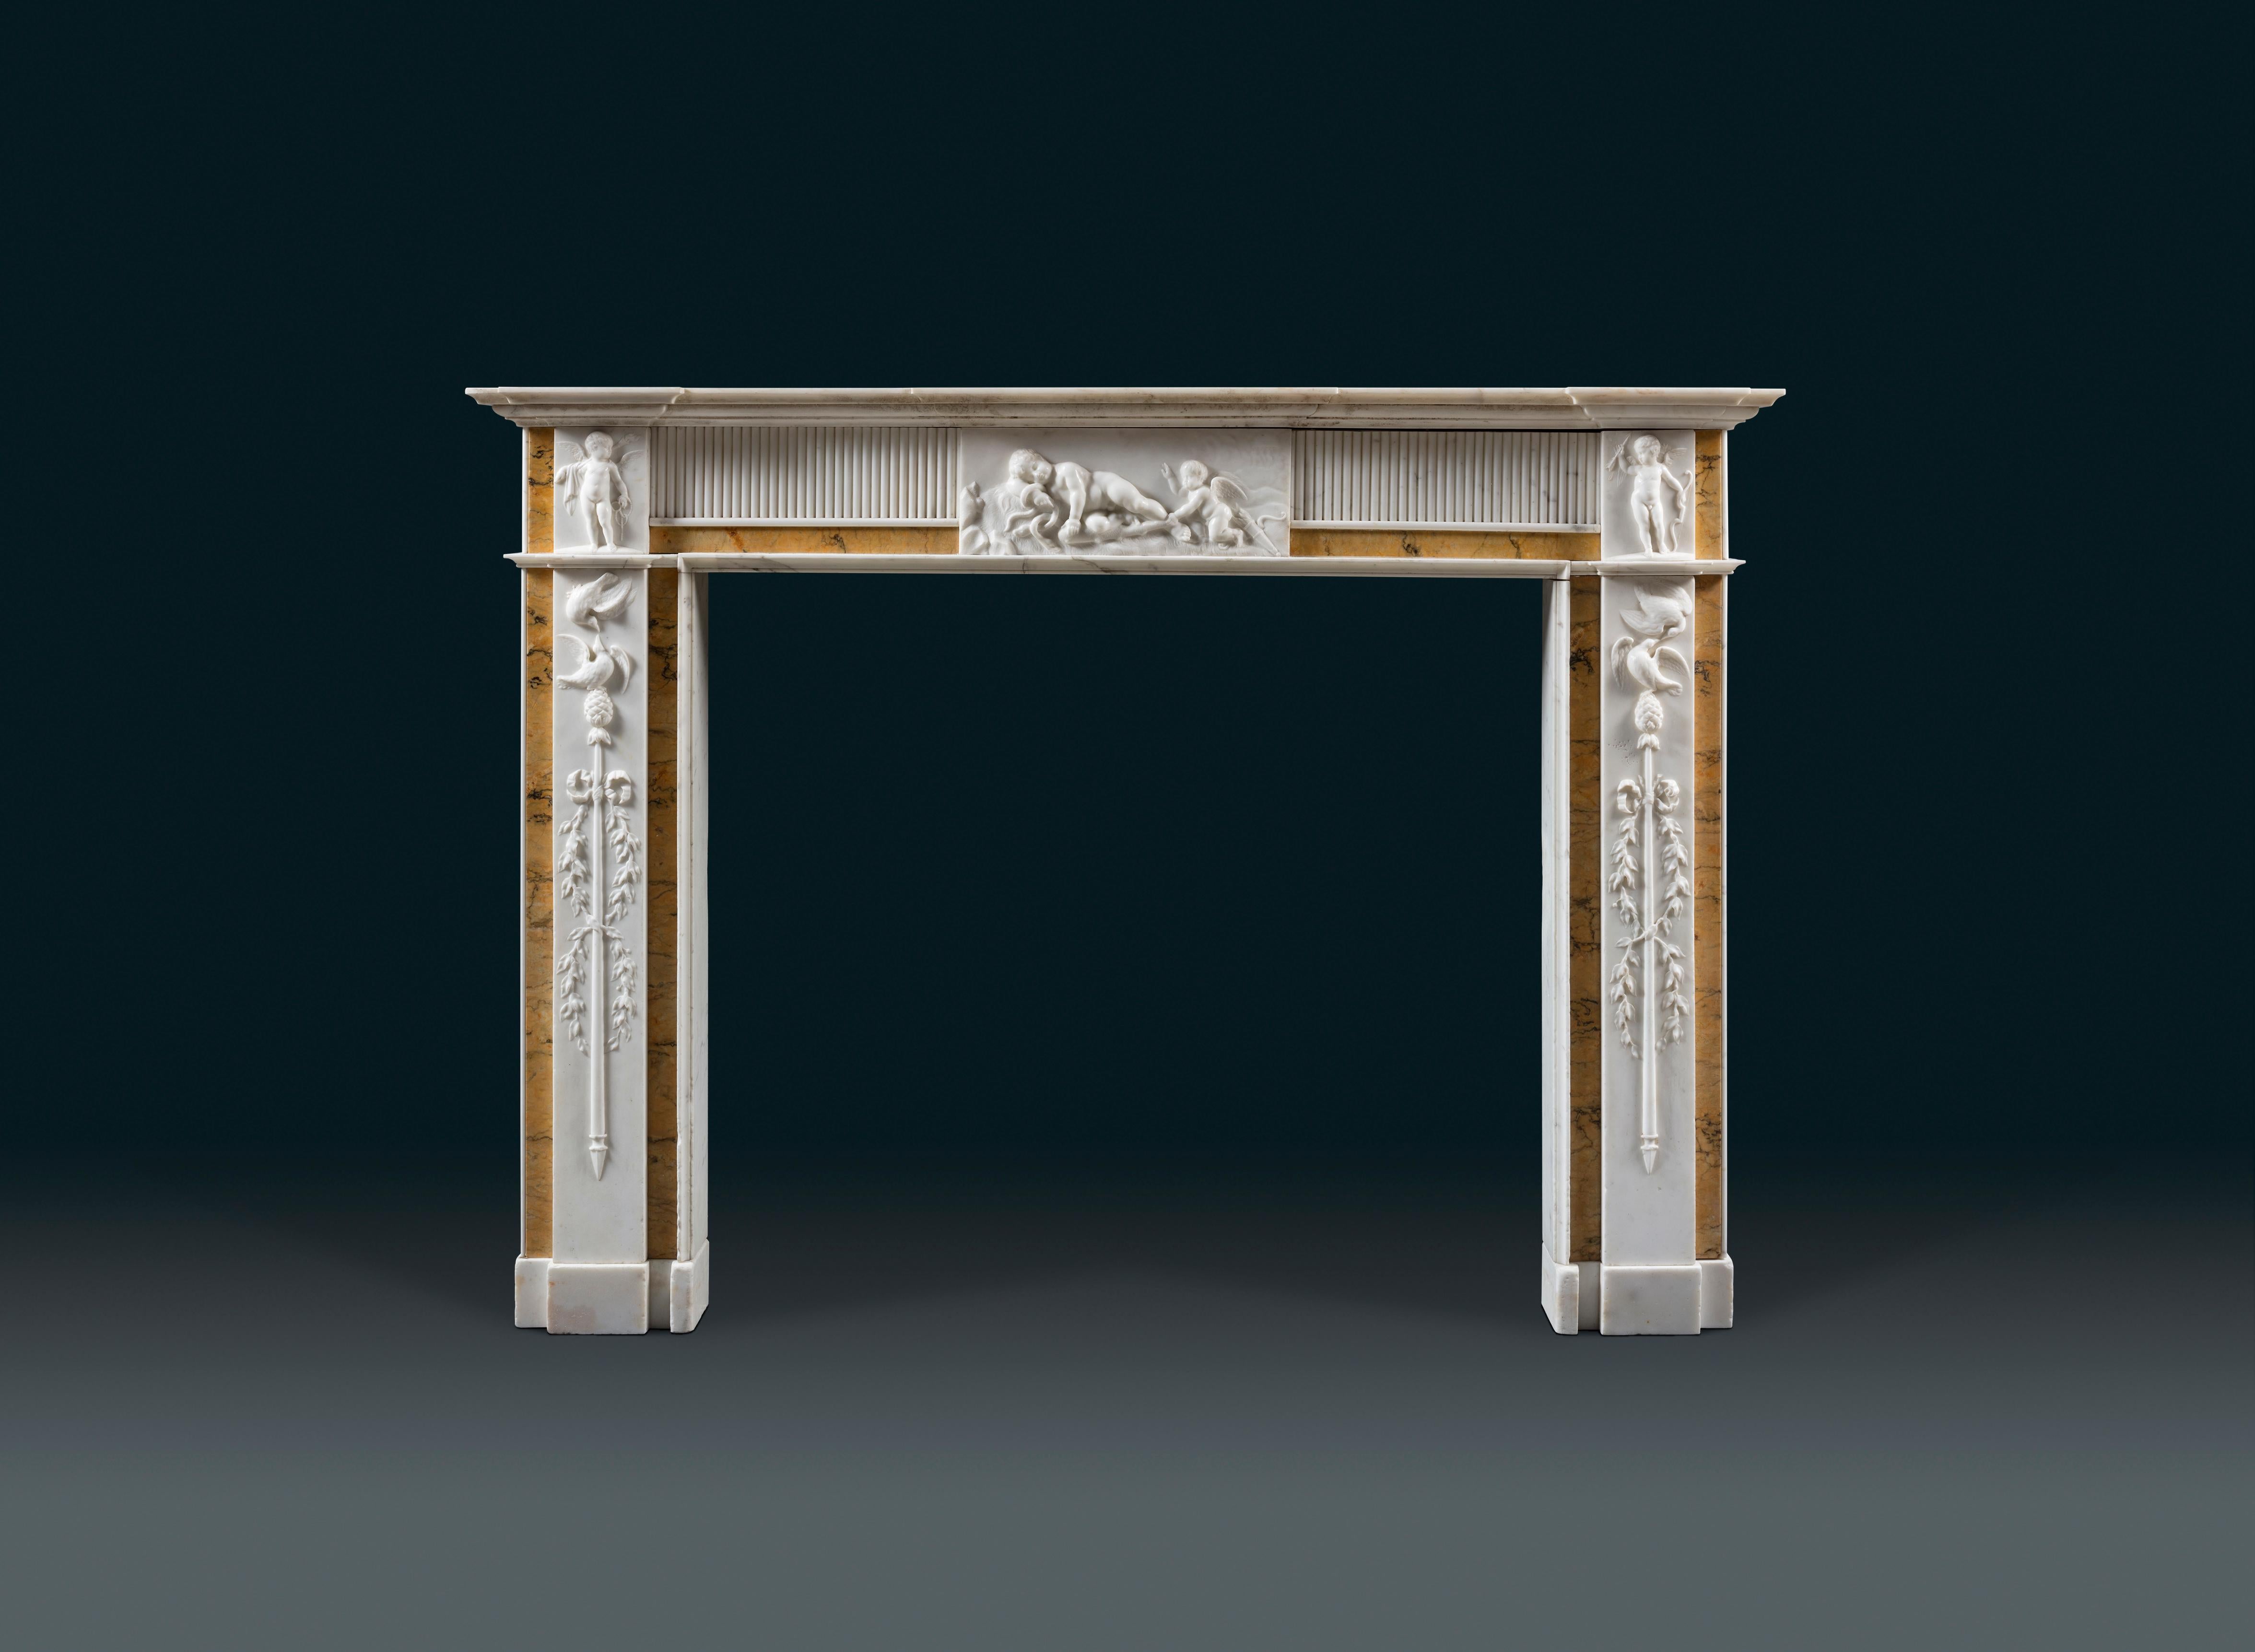 Late 18th Century Irish George III Neoclassical Mantle in Statuary Marble with Sienna Inlays